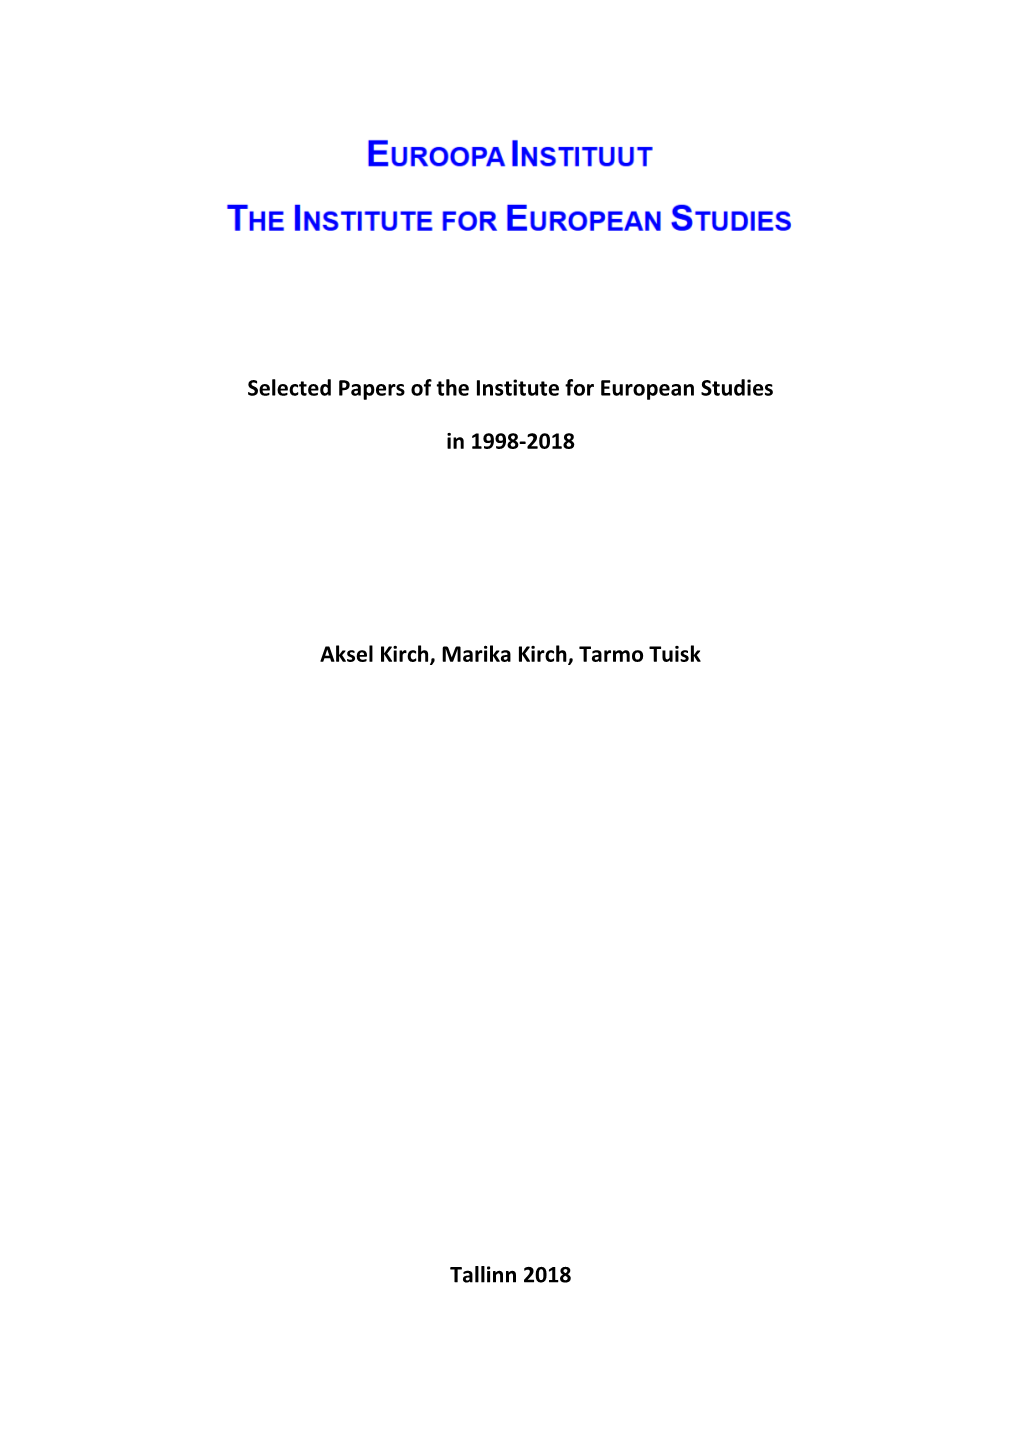 Selected Papers of the Institute for European Studies in 1998-2018 Aksel Kirch, Marika Kirch, Tarmo Tuisk Tallinn 2018